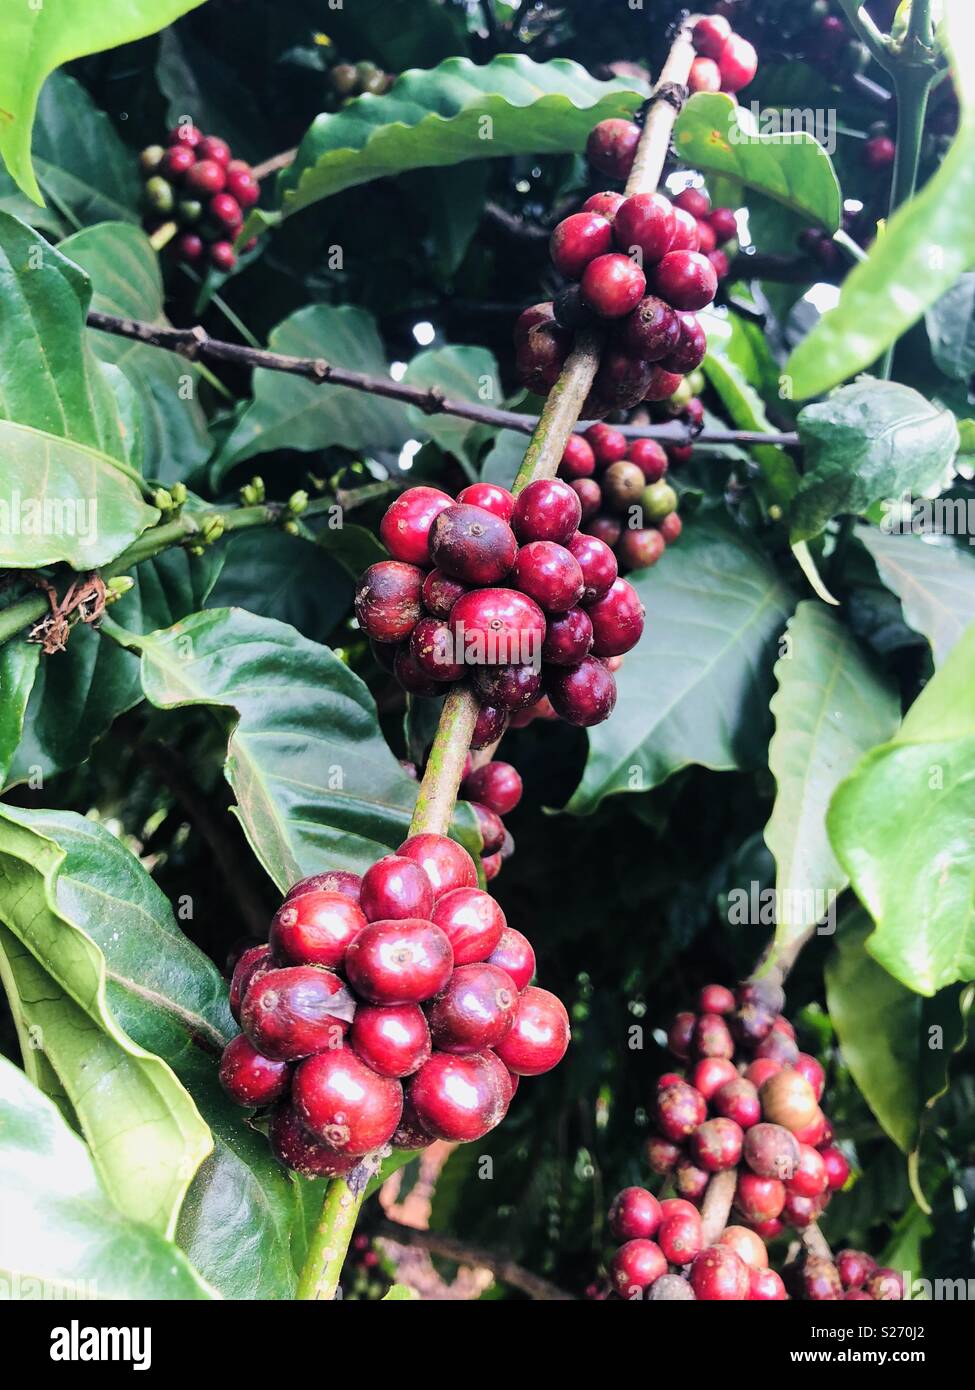 Coffee tree / bush with ripe red coffee cherries ready for harvesting in the mountains of Vietnam Asia Stock Photo